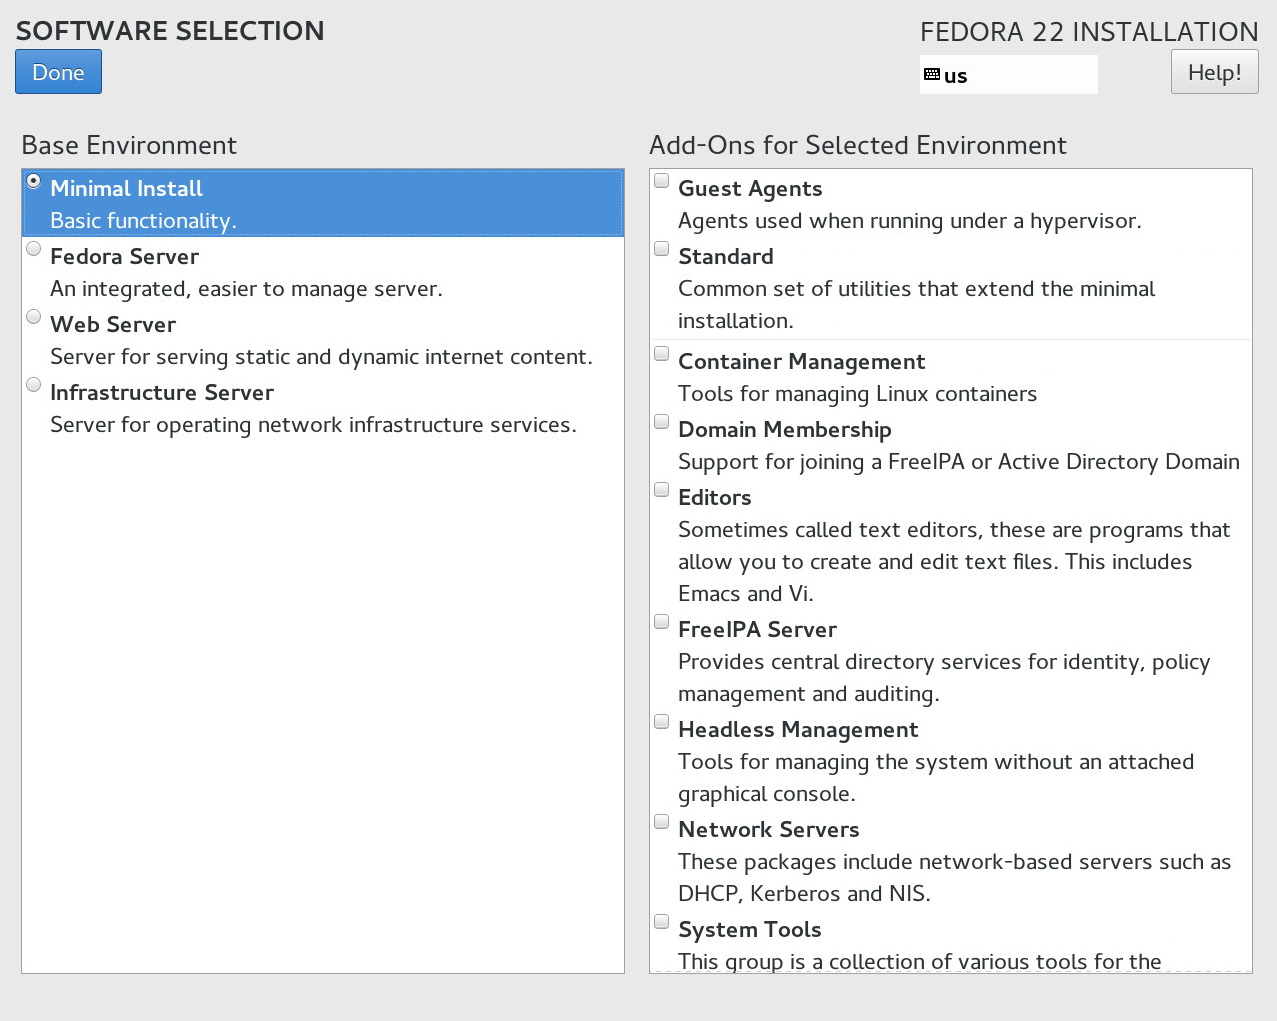 Software Selection Screen